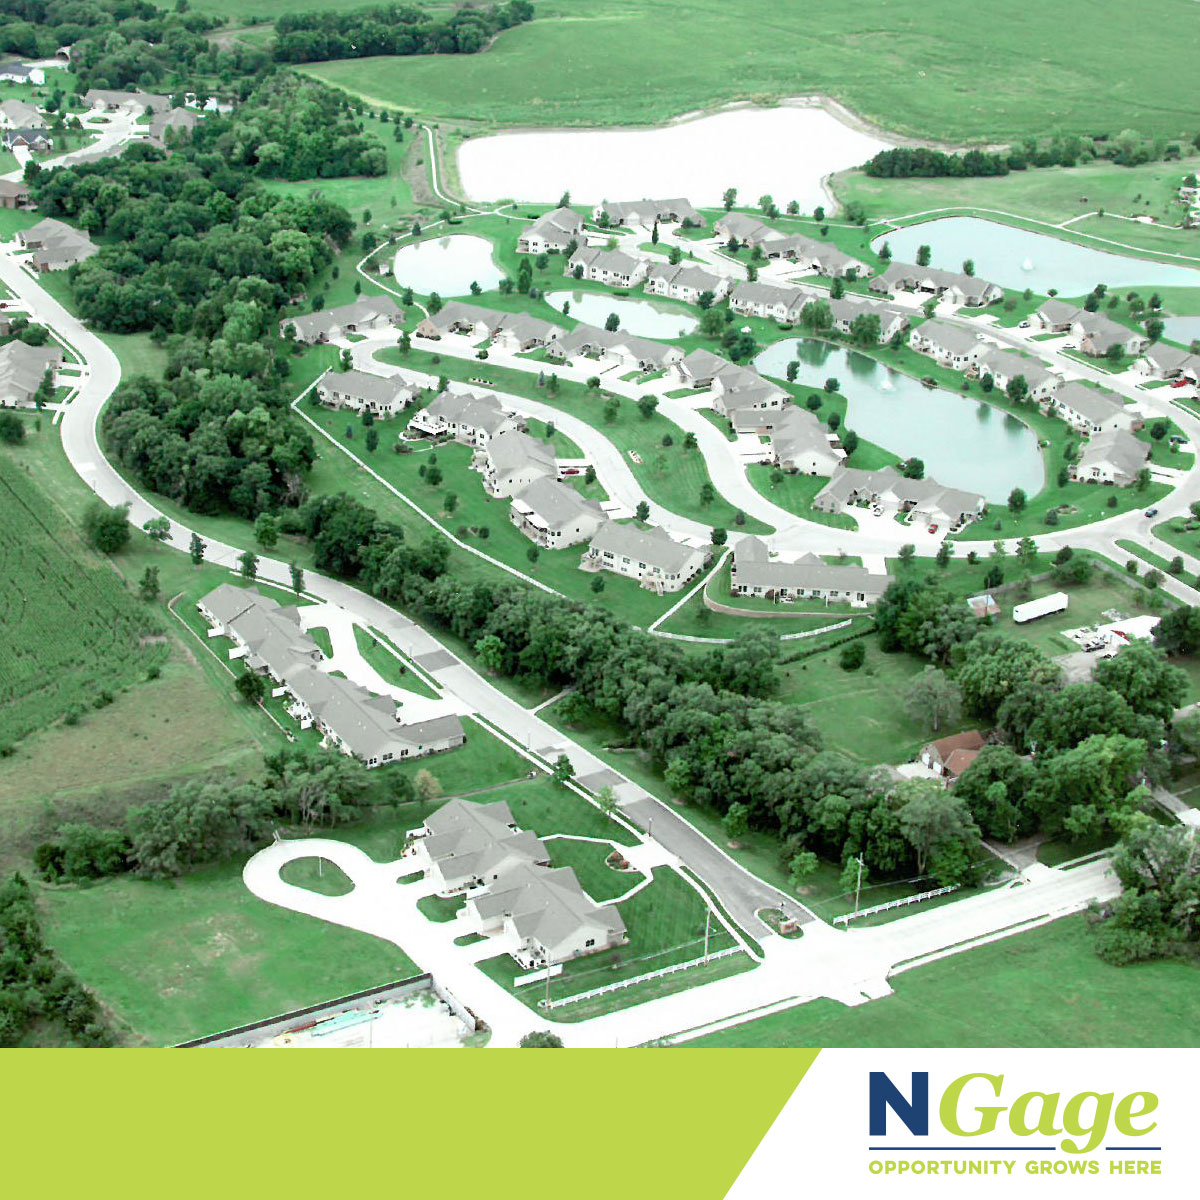 Click the NGage Works to Secure Grants for Housing in Gage County Slide Photo to Open